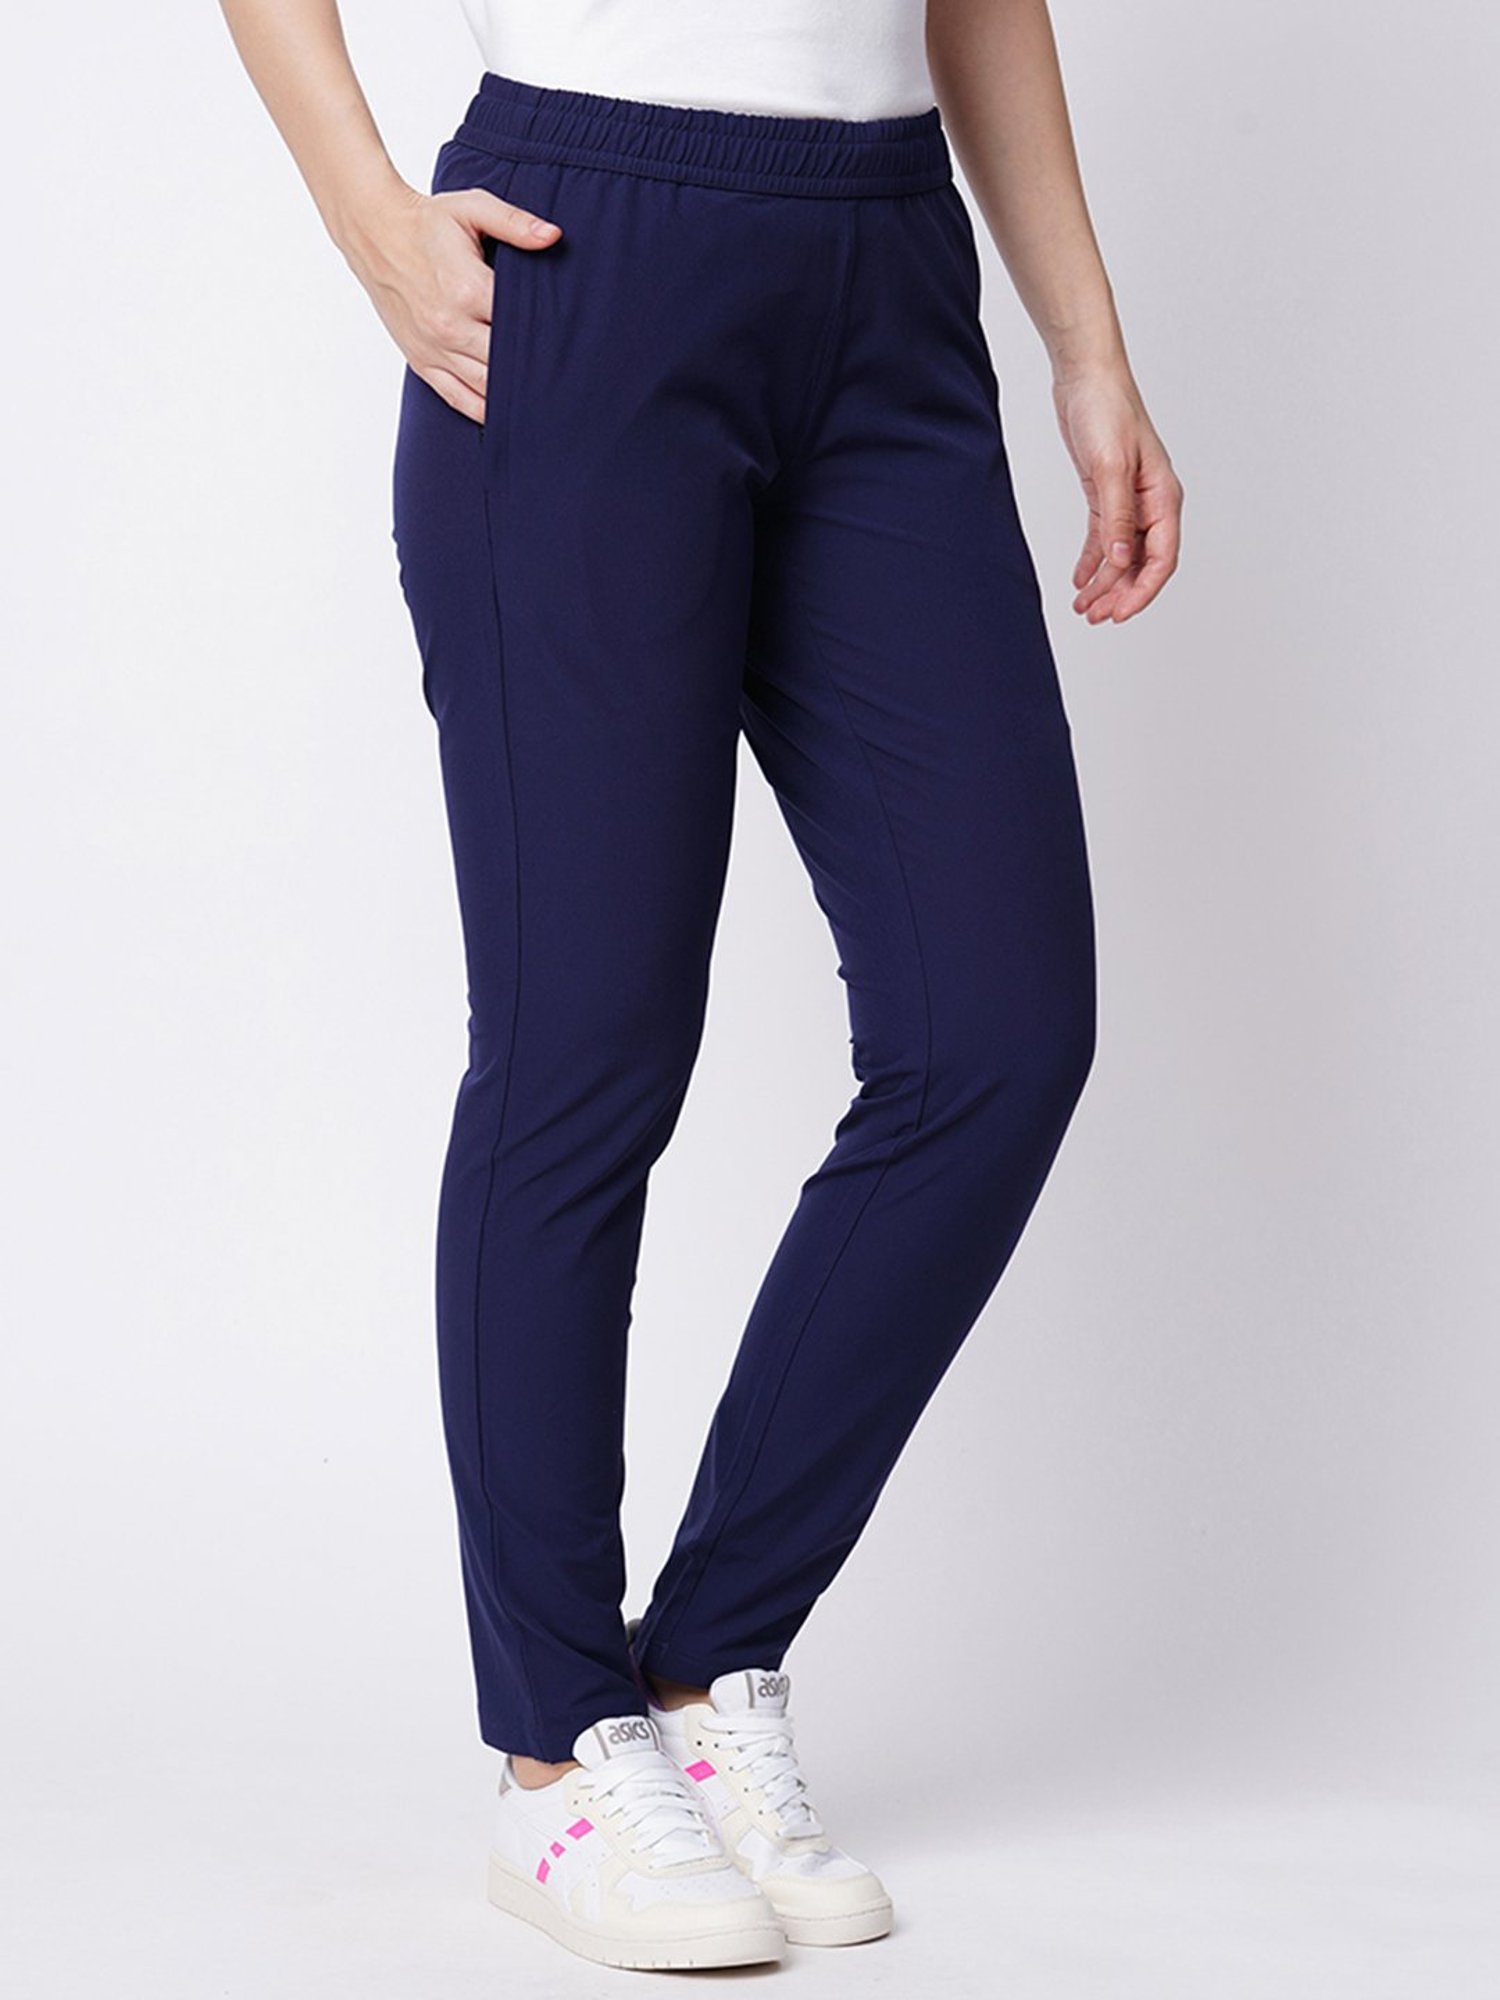 Buy SHAUN Women's Regular Fit Trackpants (B078W4VZF1_Red,Blue &  Black_Small) at Amazon.in